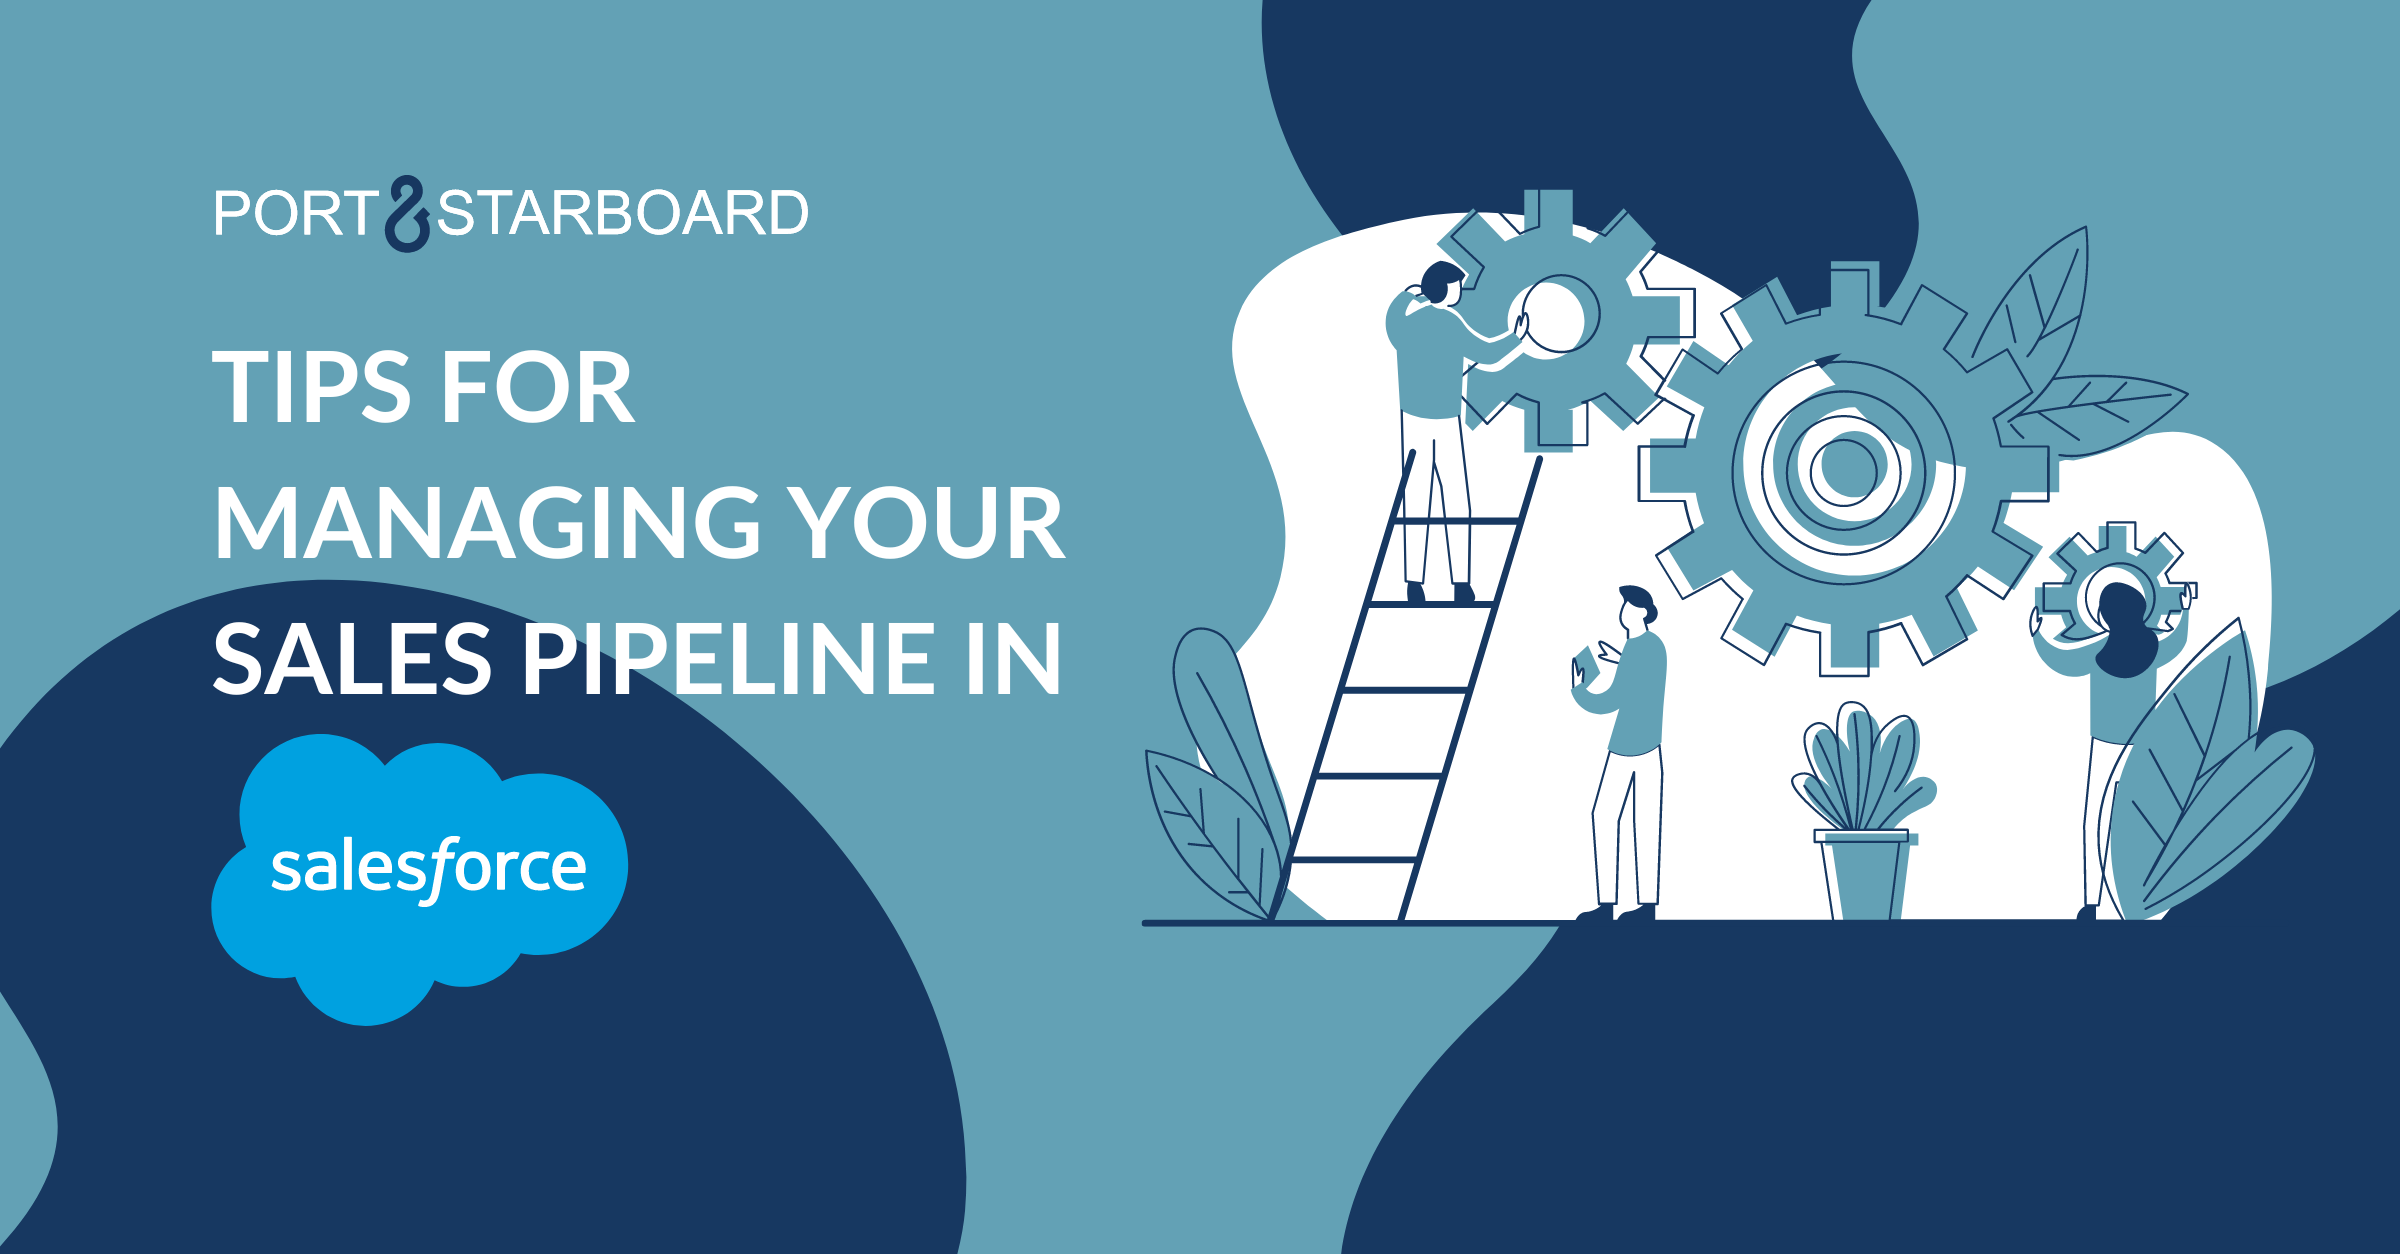 Tips and best practices to follow for effective salesforce pipeline management